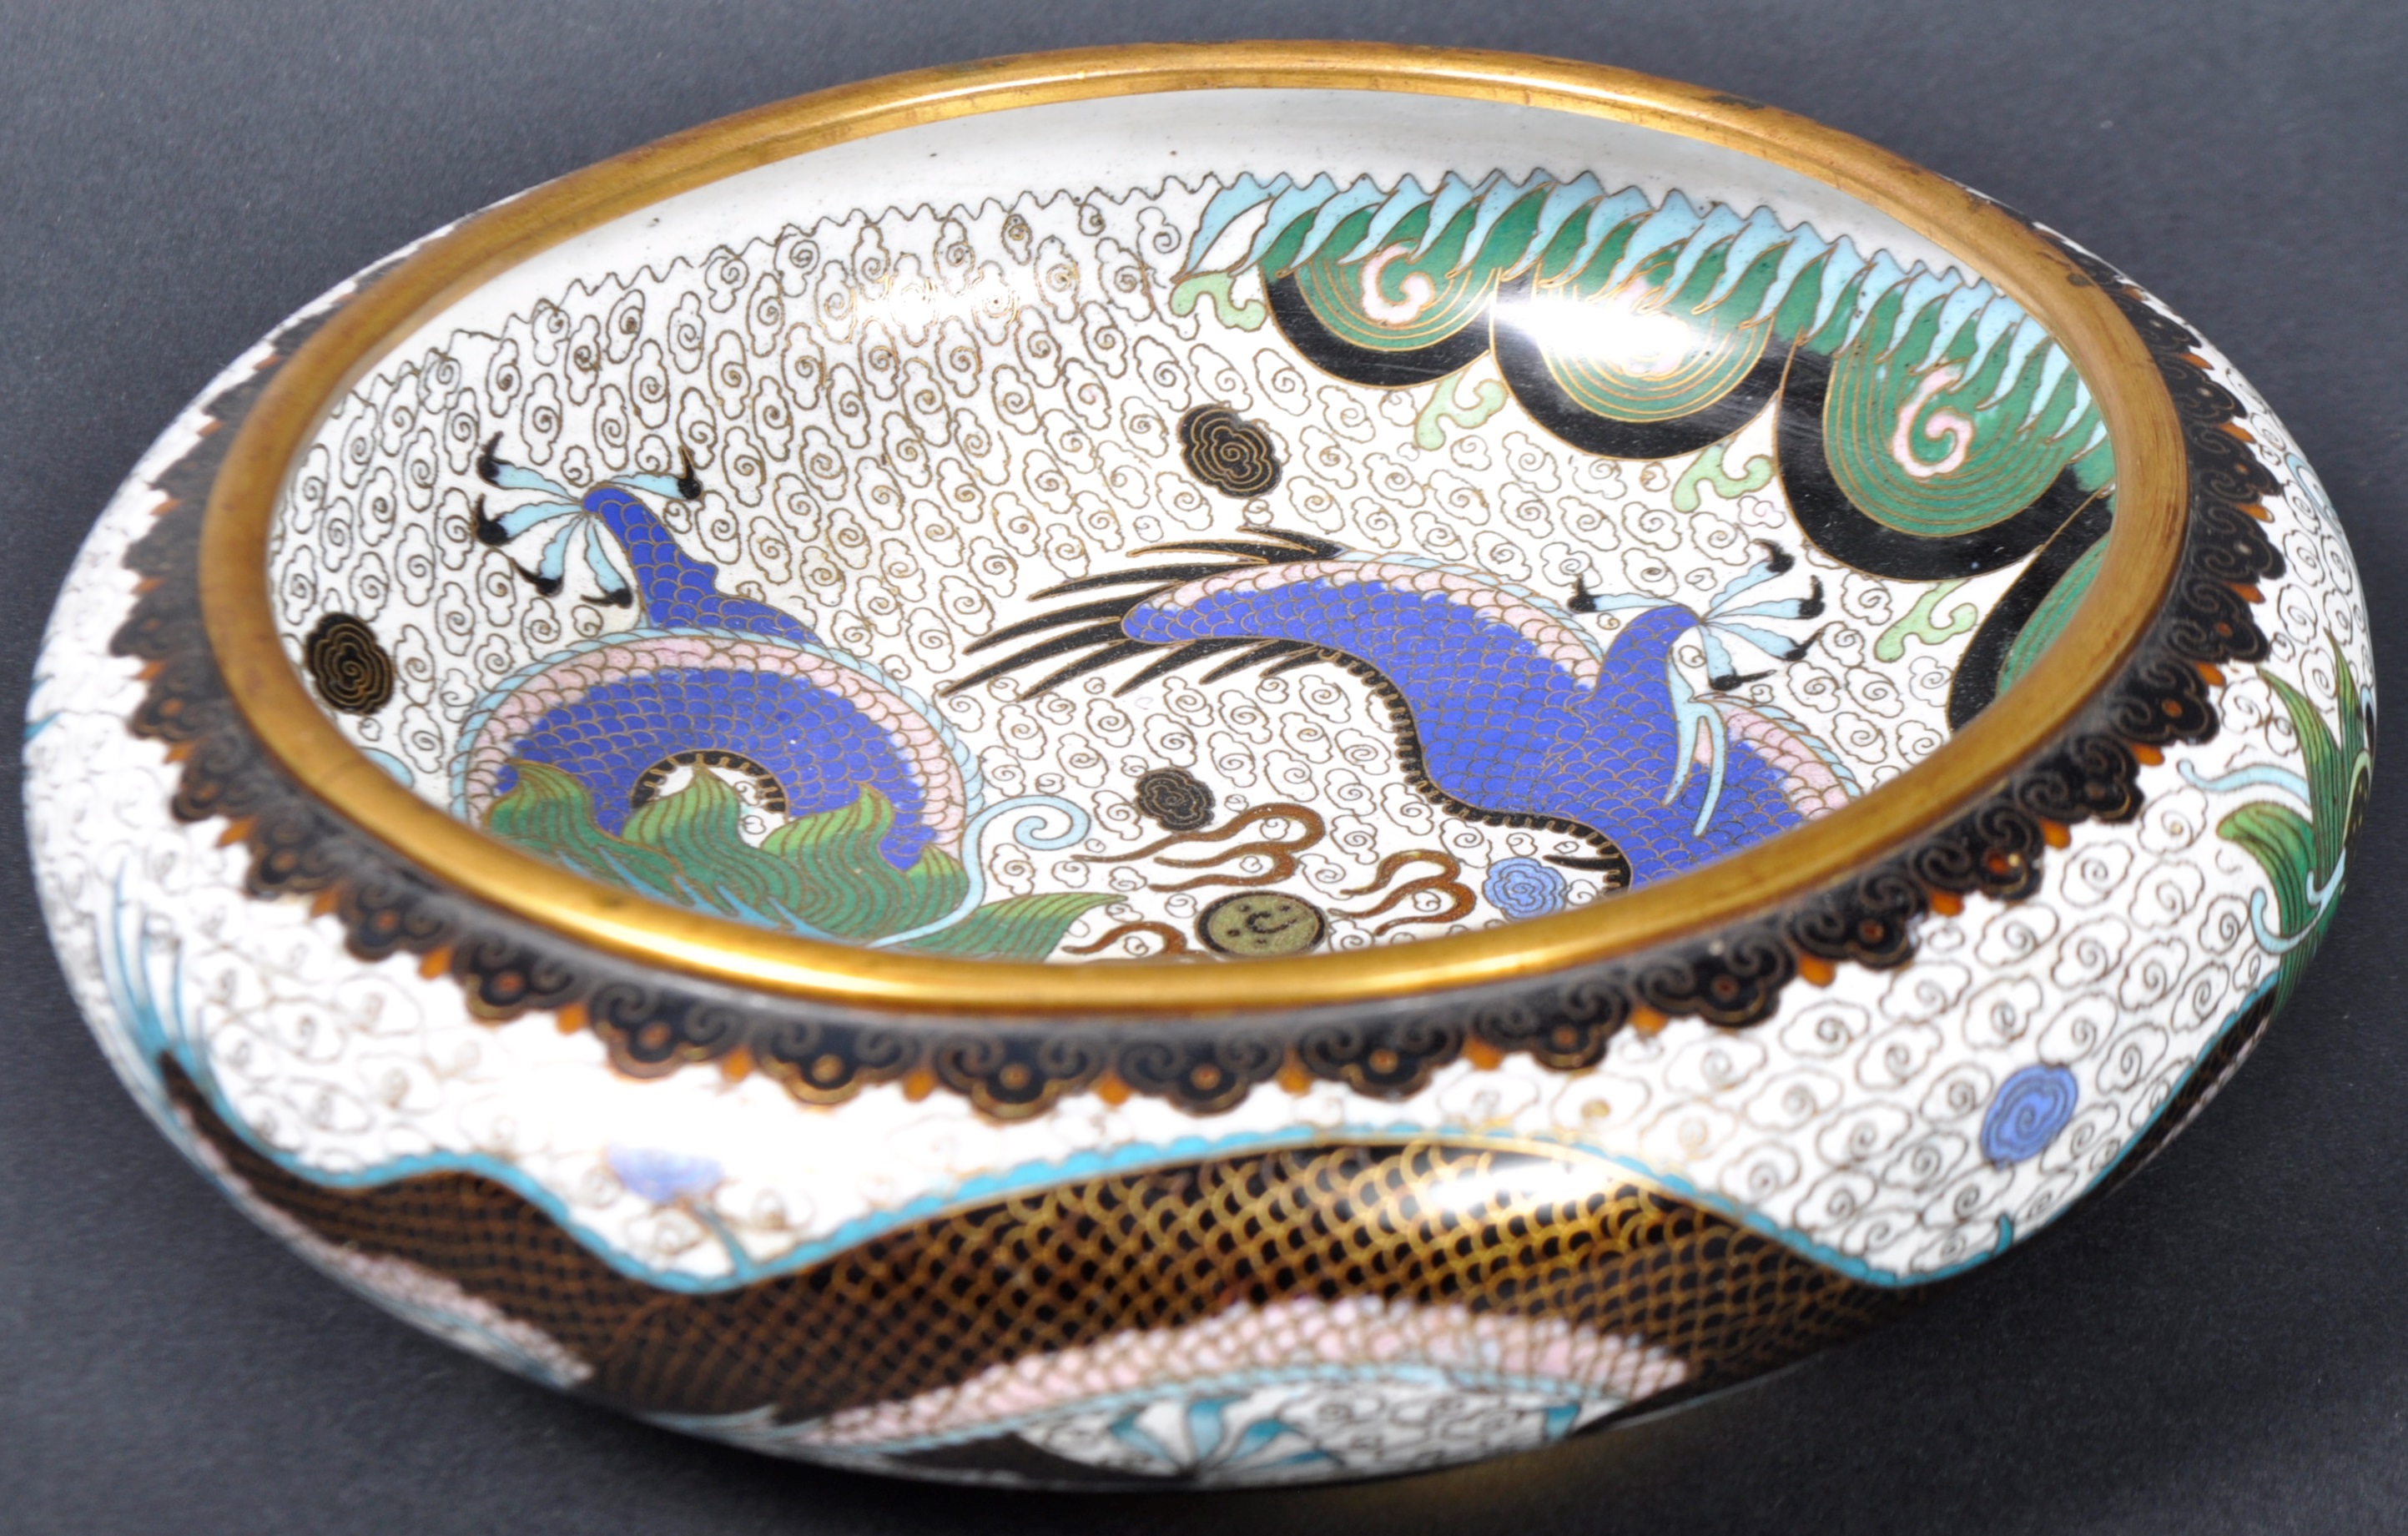 EARLY 20TH CENTURY CHINESE QING DYNASTY CLOISONNÉ BRONZE BOWL - Image 8 of 9